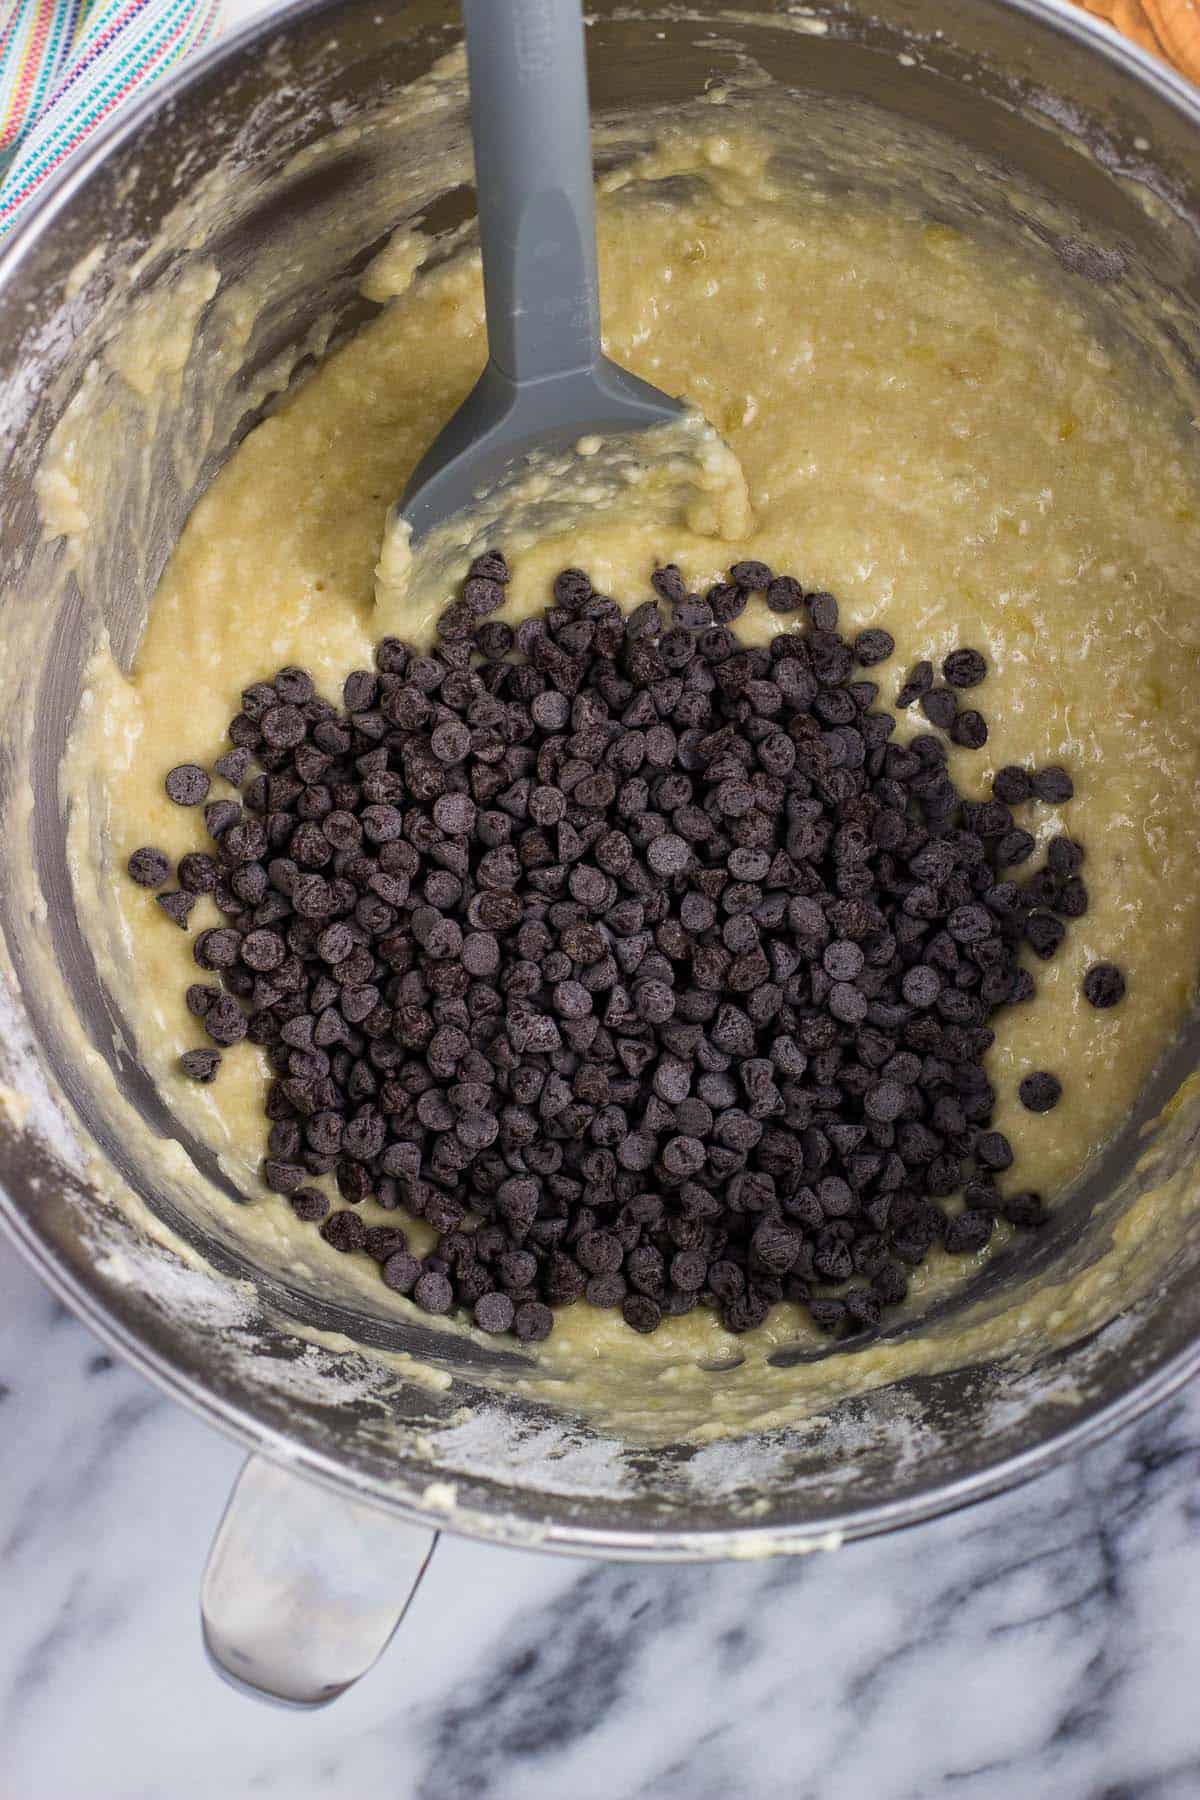 Mini chocolate chips poured into the bowl of batter.